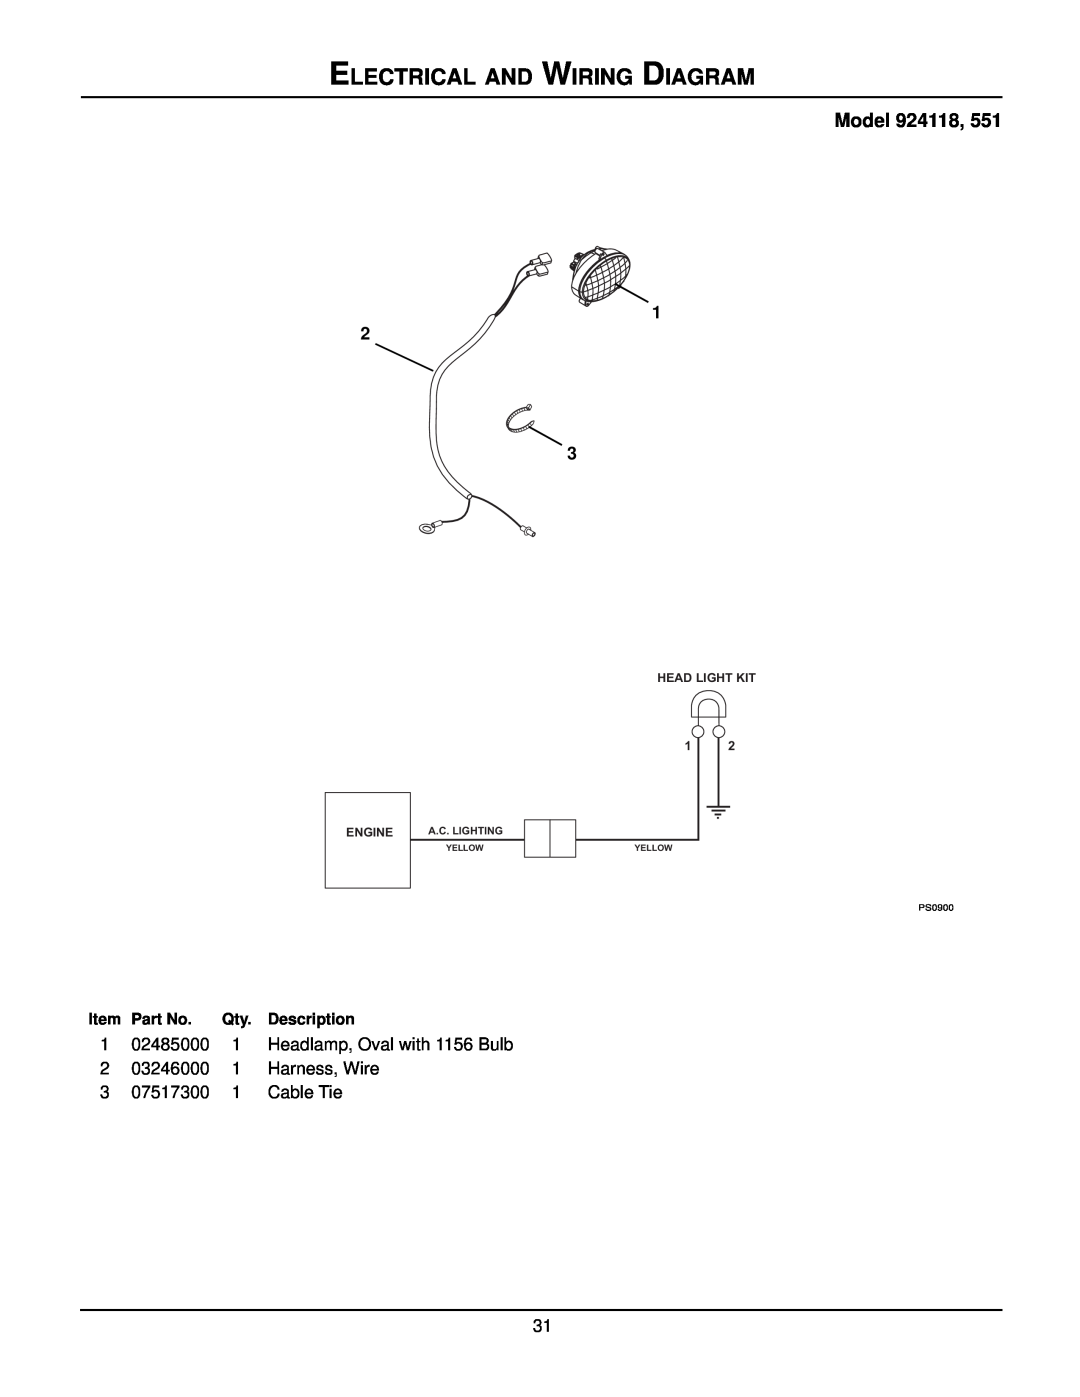 Ariens 924118 - 8524, 924506 - 1336 Electrical And Wiring Diagram, Model, Item Part No. Qty. Description, Yellow, PS0900 